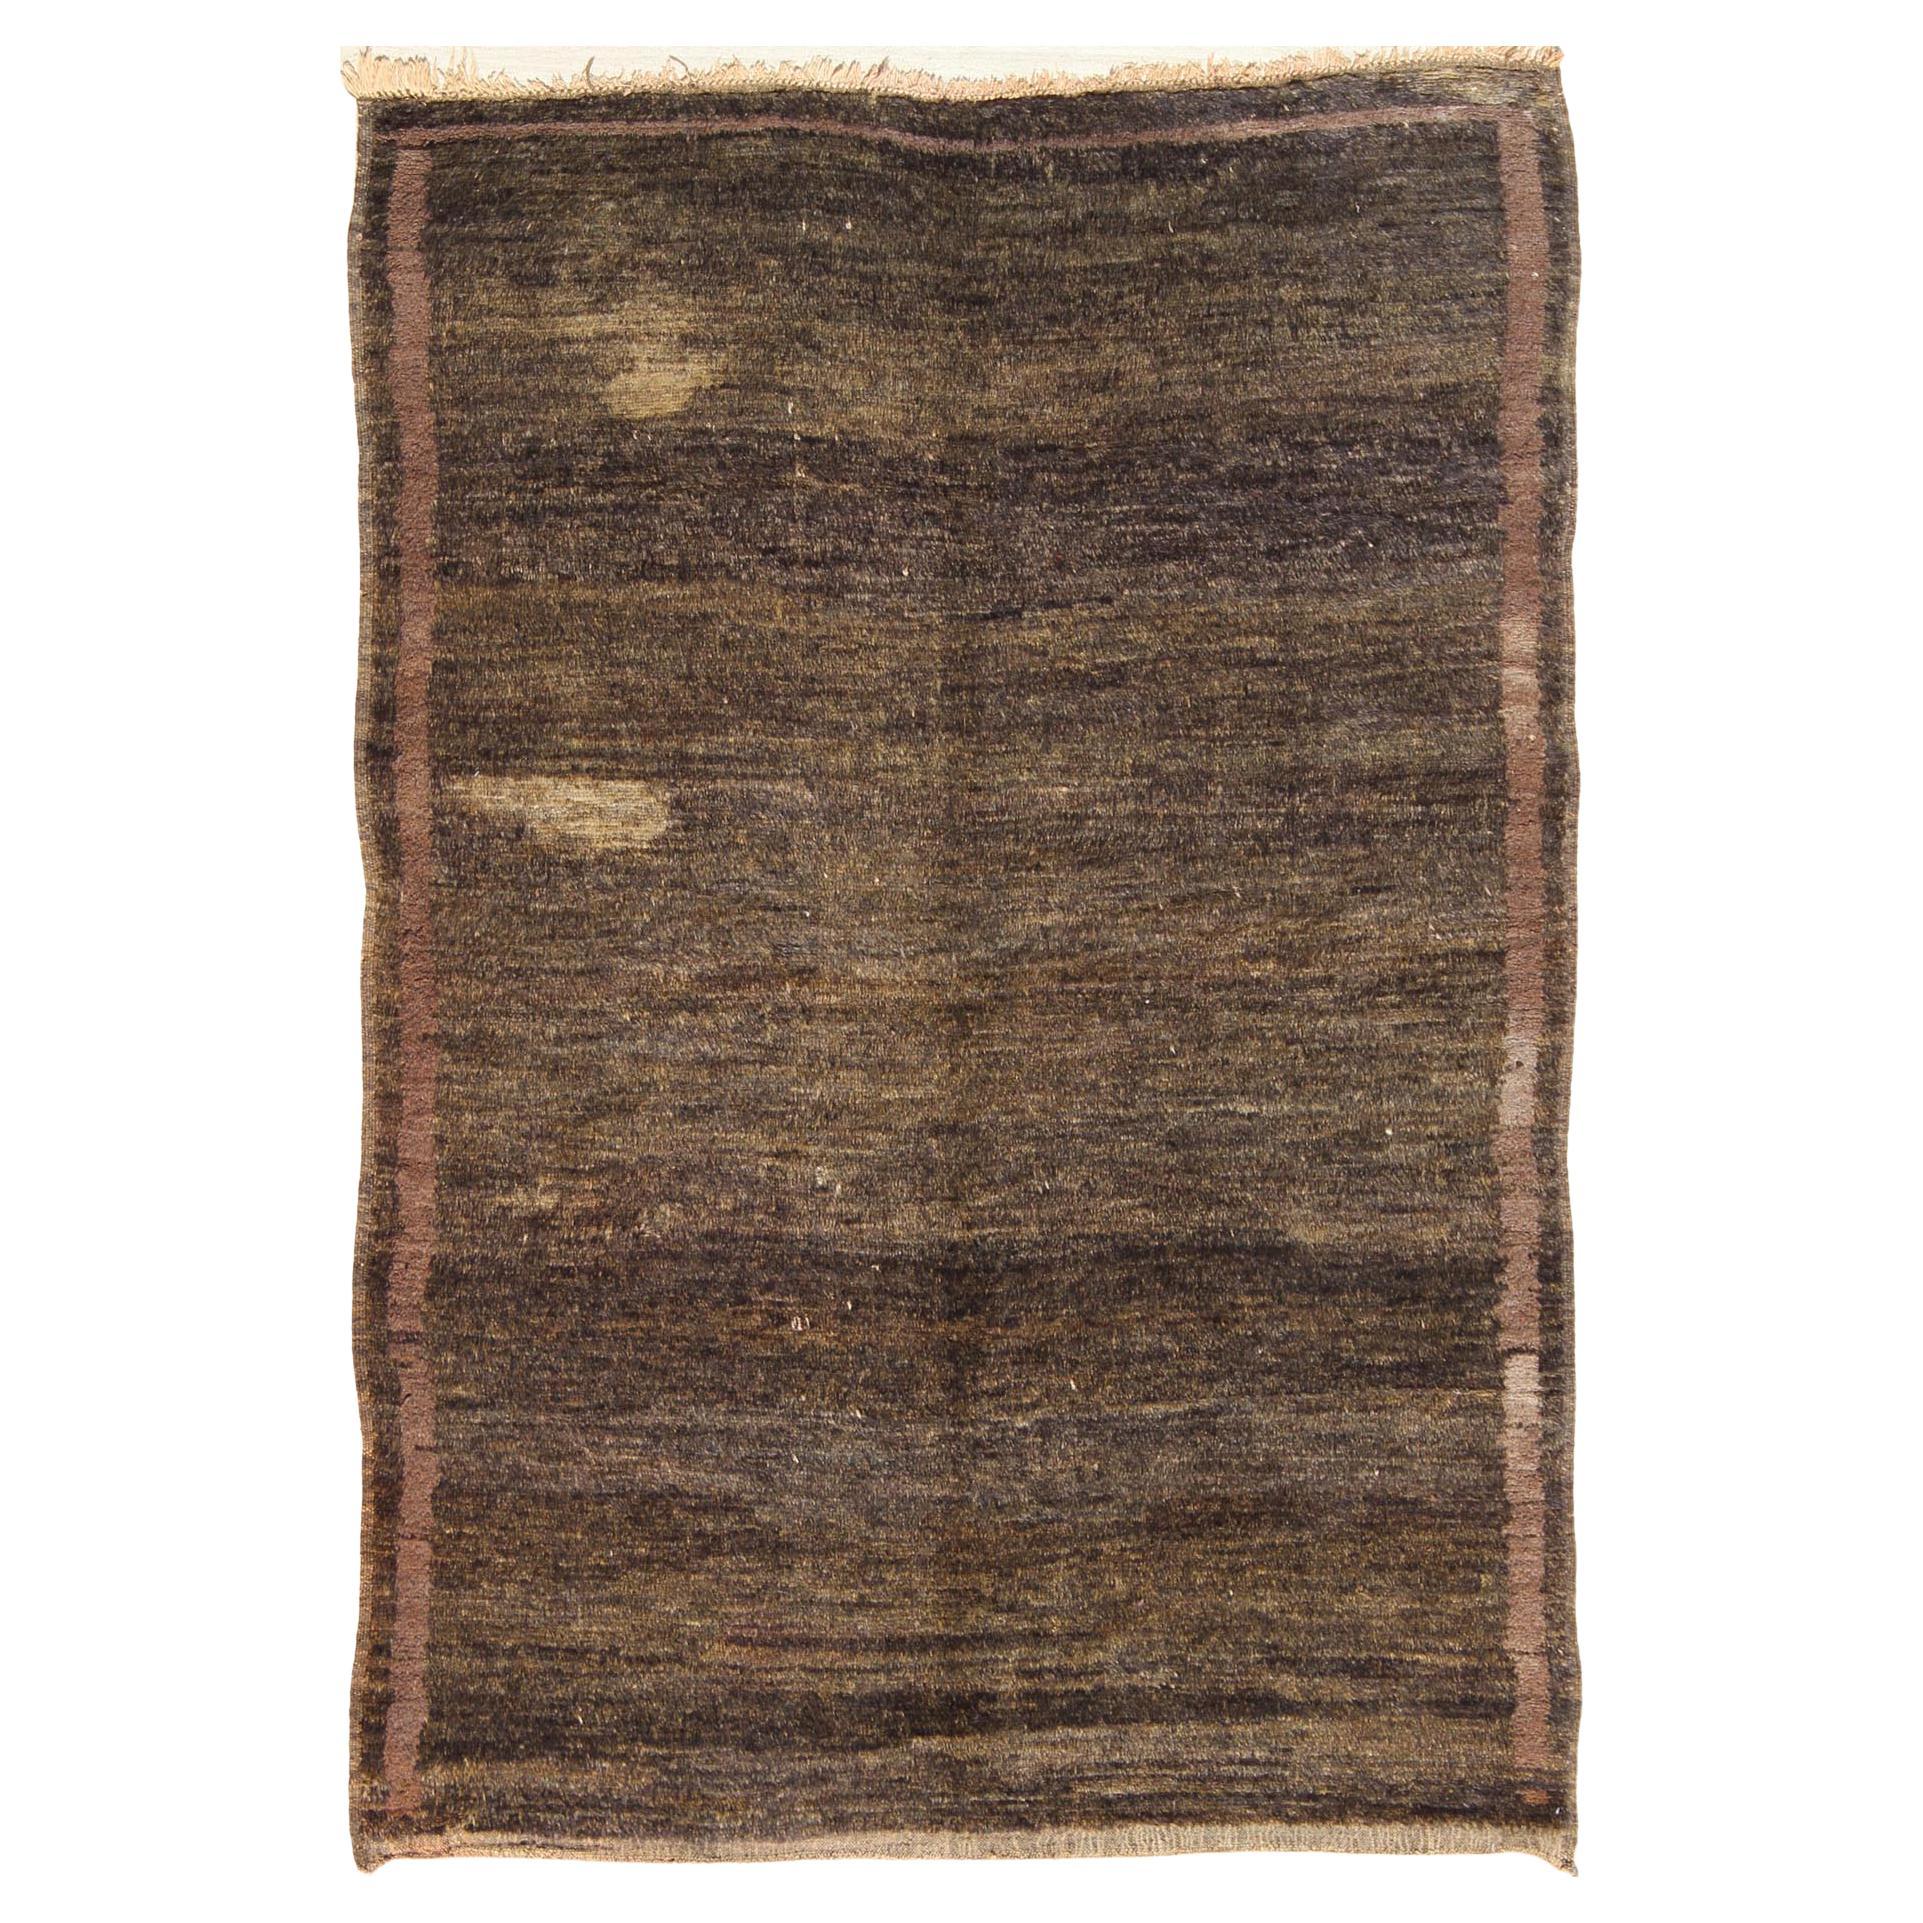 Natural Hand Knotted Moroccan Carpet with Solid Design in Shades of Brown